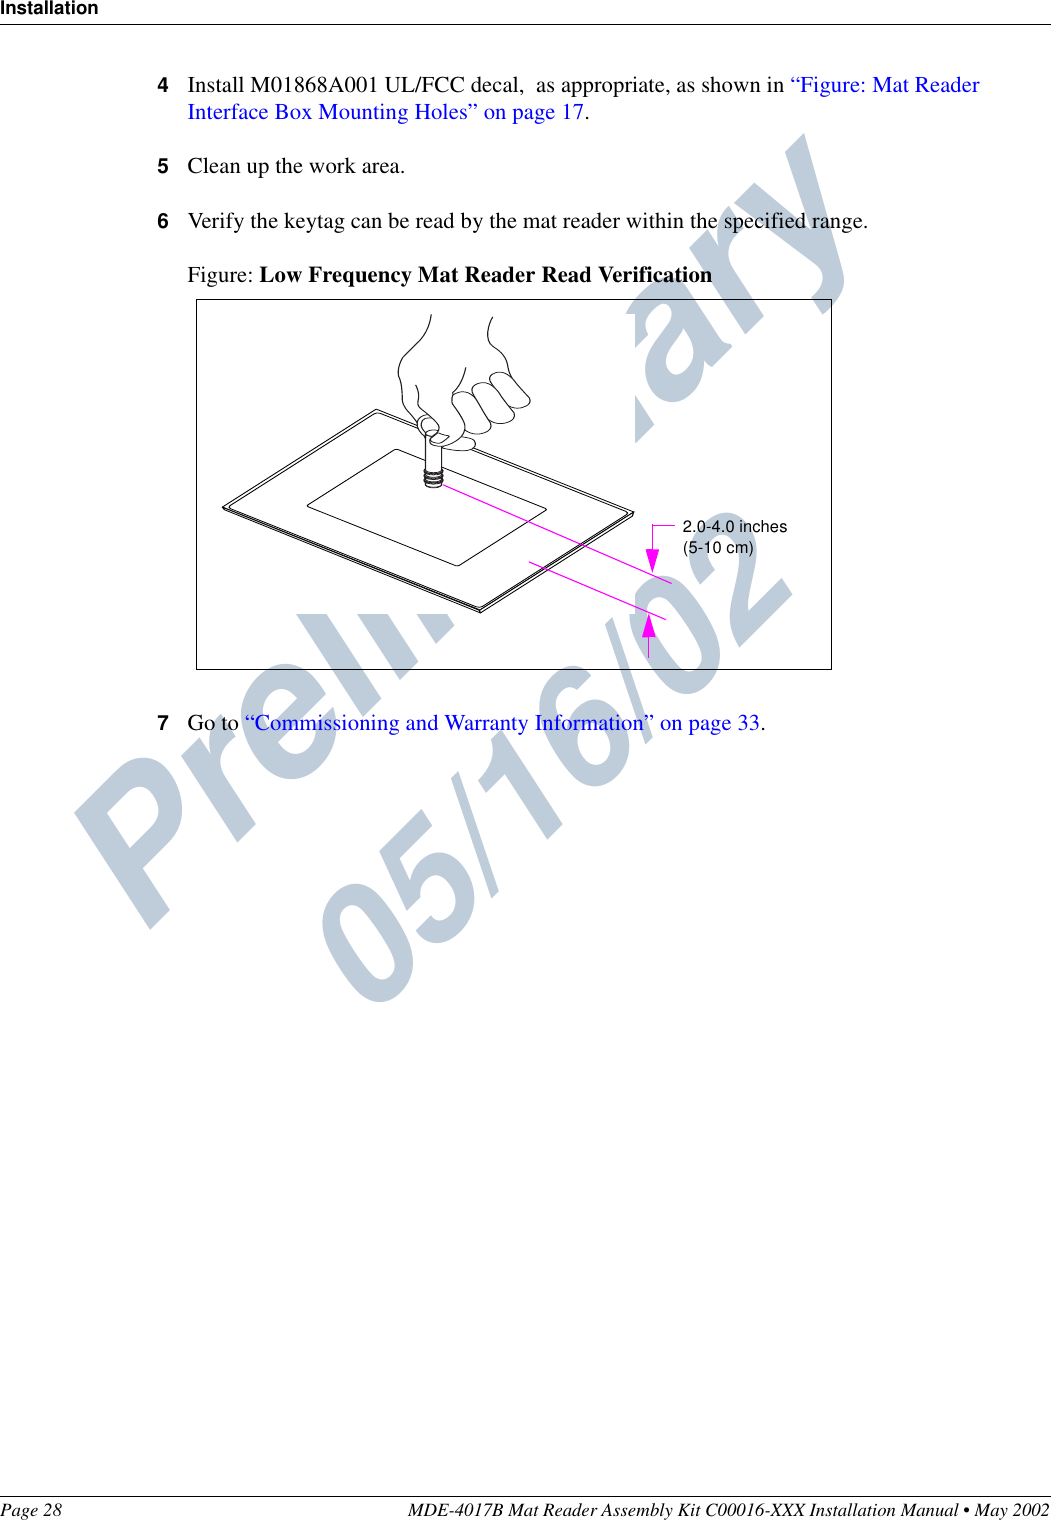 Preliminary  05/16/02InstallationPage 28 MDE-4017B Mat Reader Assembly Kit C00016-XXX Installation Manual • May 20024Install M01868A001 UL/FCC decal,  as appropriate, as shown in “Figure: Mat Reader Interface Box Mounting Holes” on page 17.5Clean up the work area.6Verify the keytag can be read by the mat reader within the specified range.Figure: Low Frequency Mat Reader Read Verification7Go to “Commissioning and Warranty Information” on page 33.2.0-4.0 inches(5-10 cm)